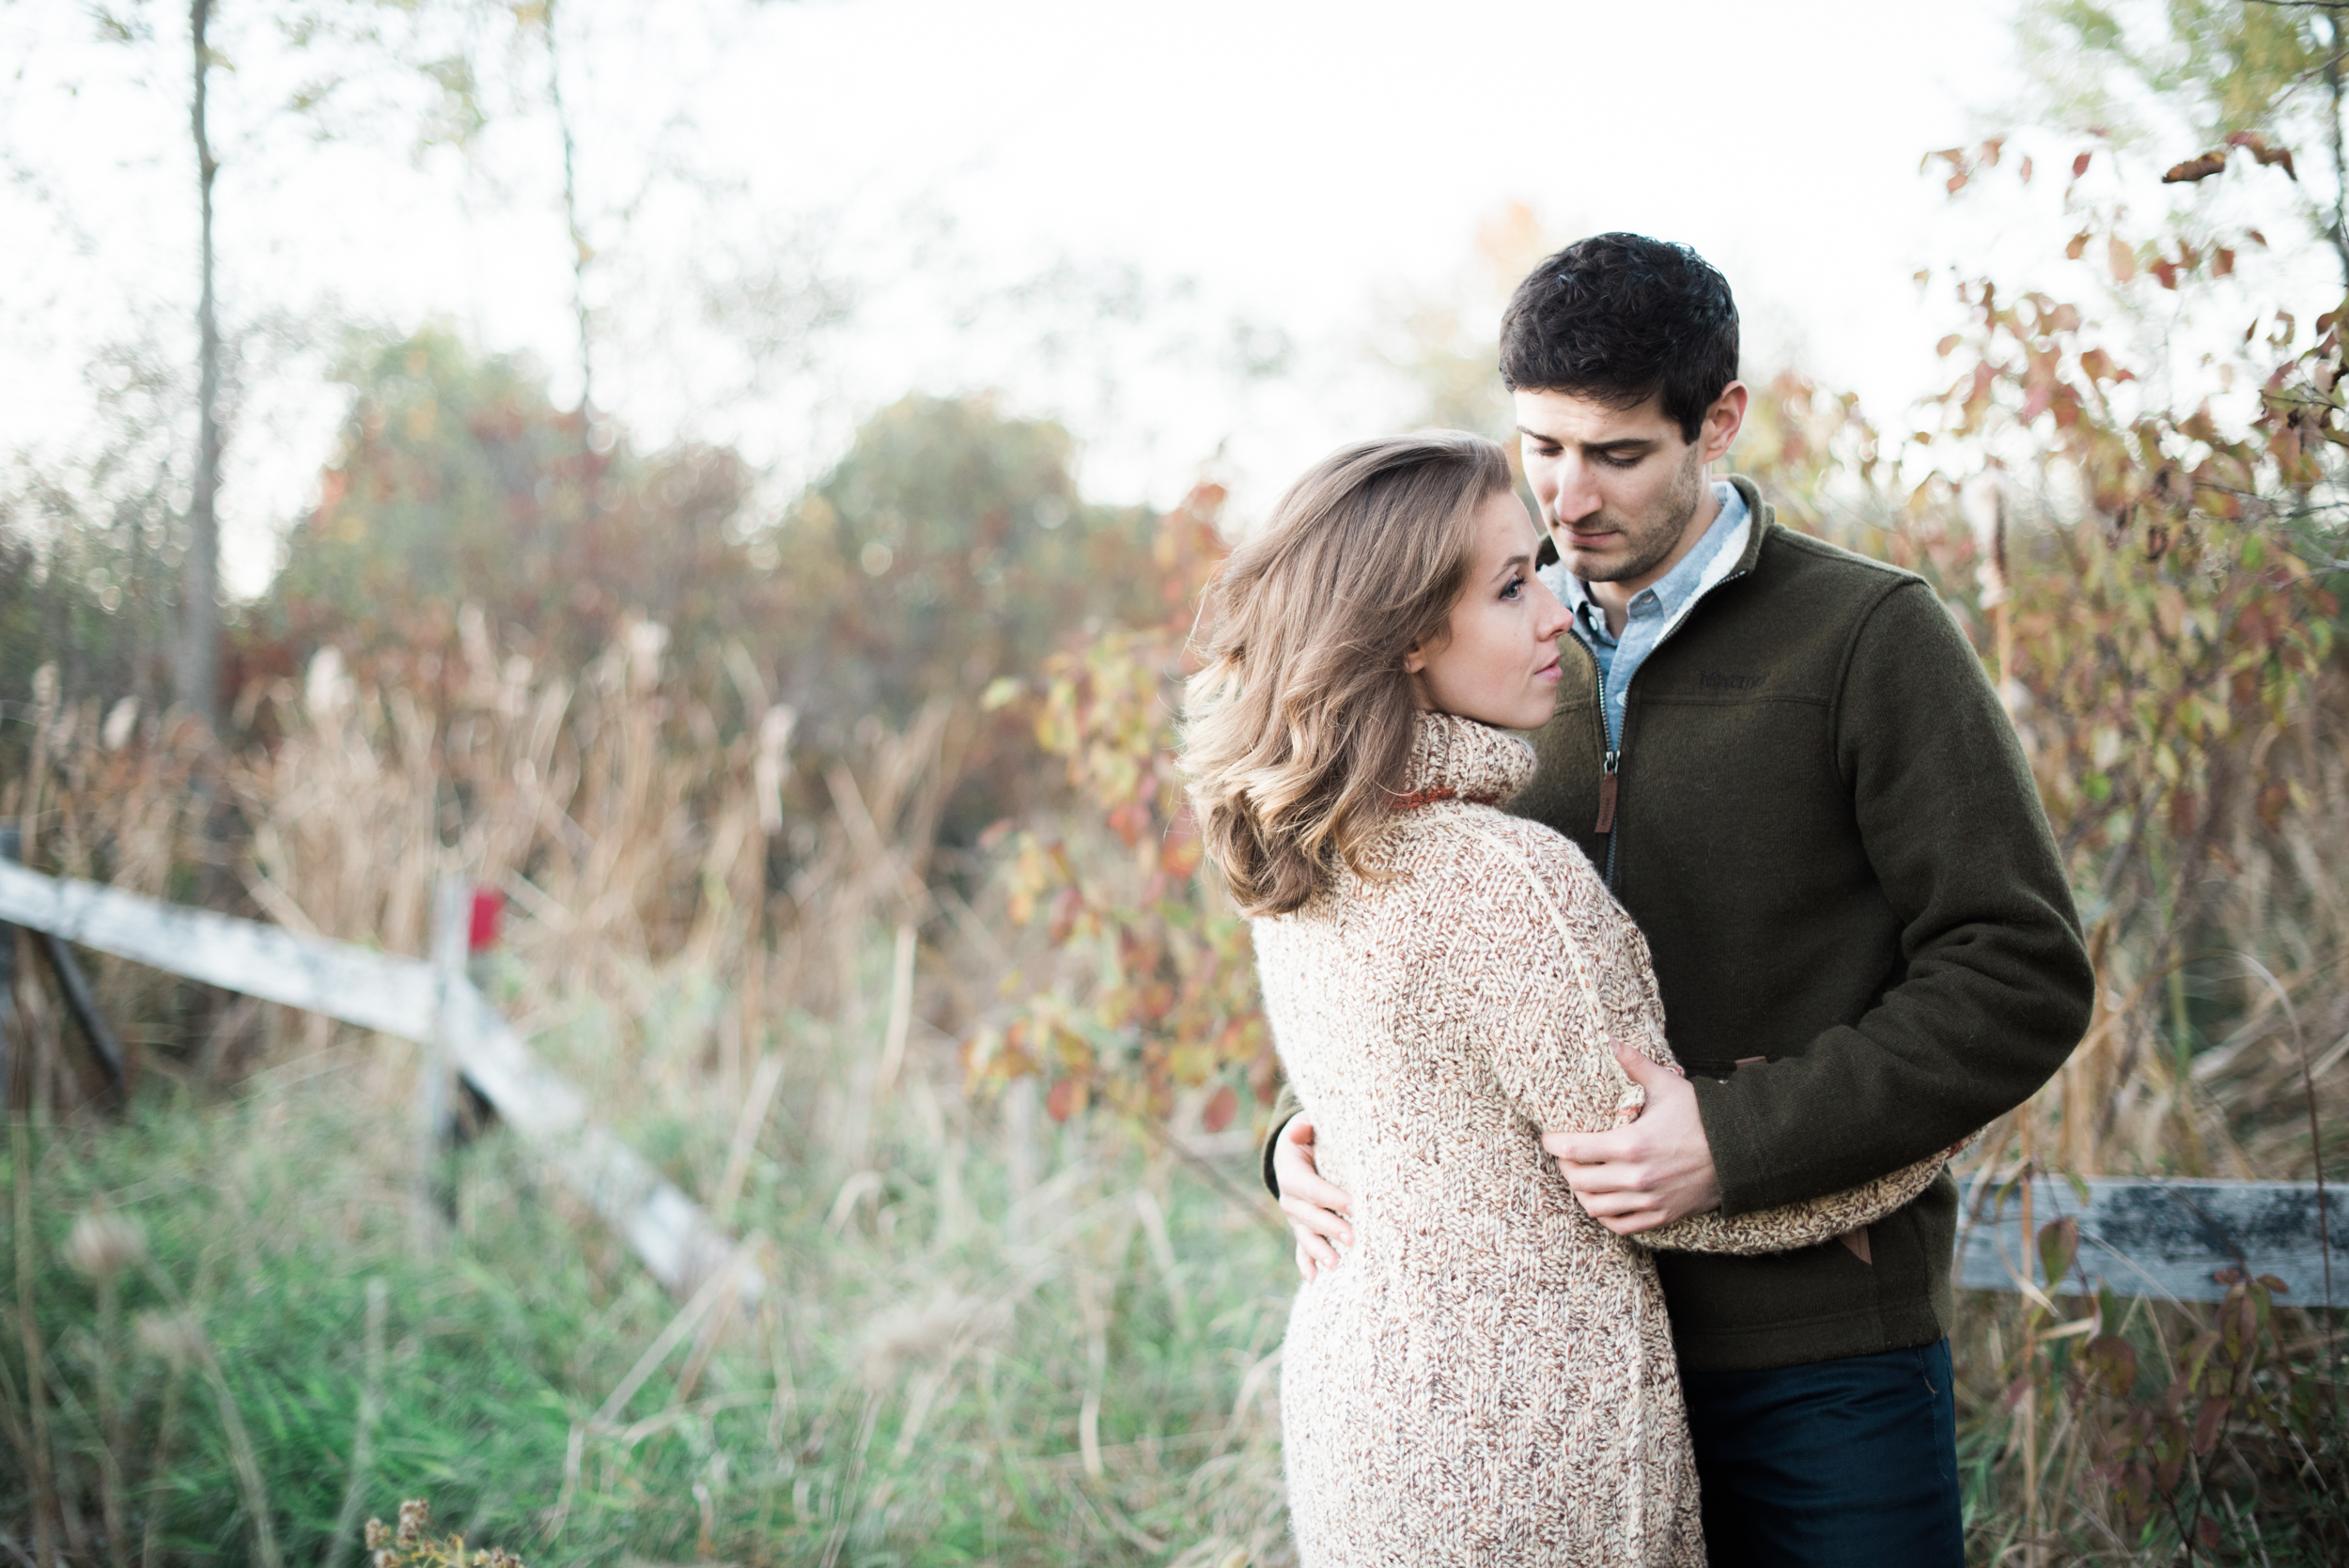 Romantic Engagement Photography in MA